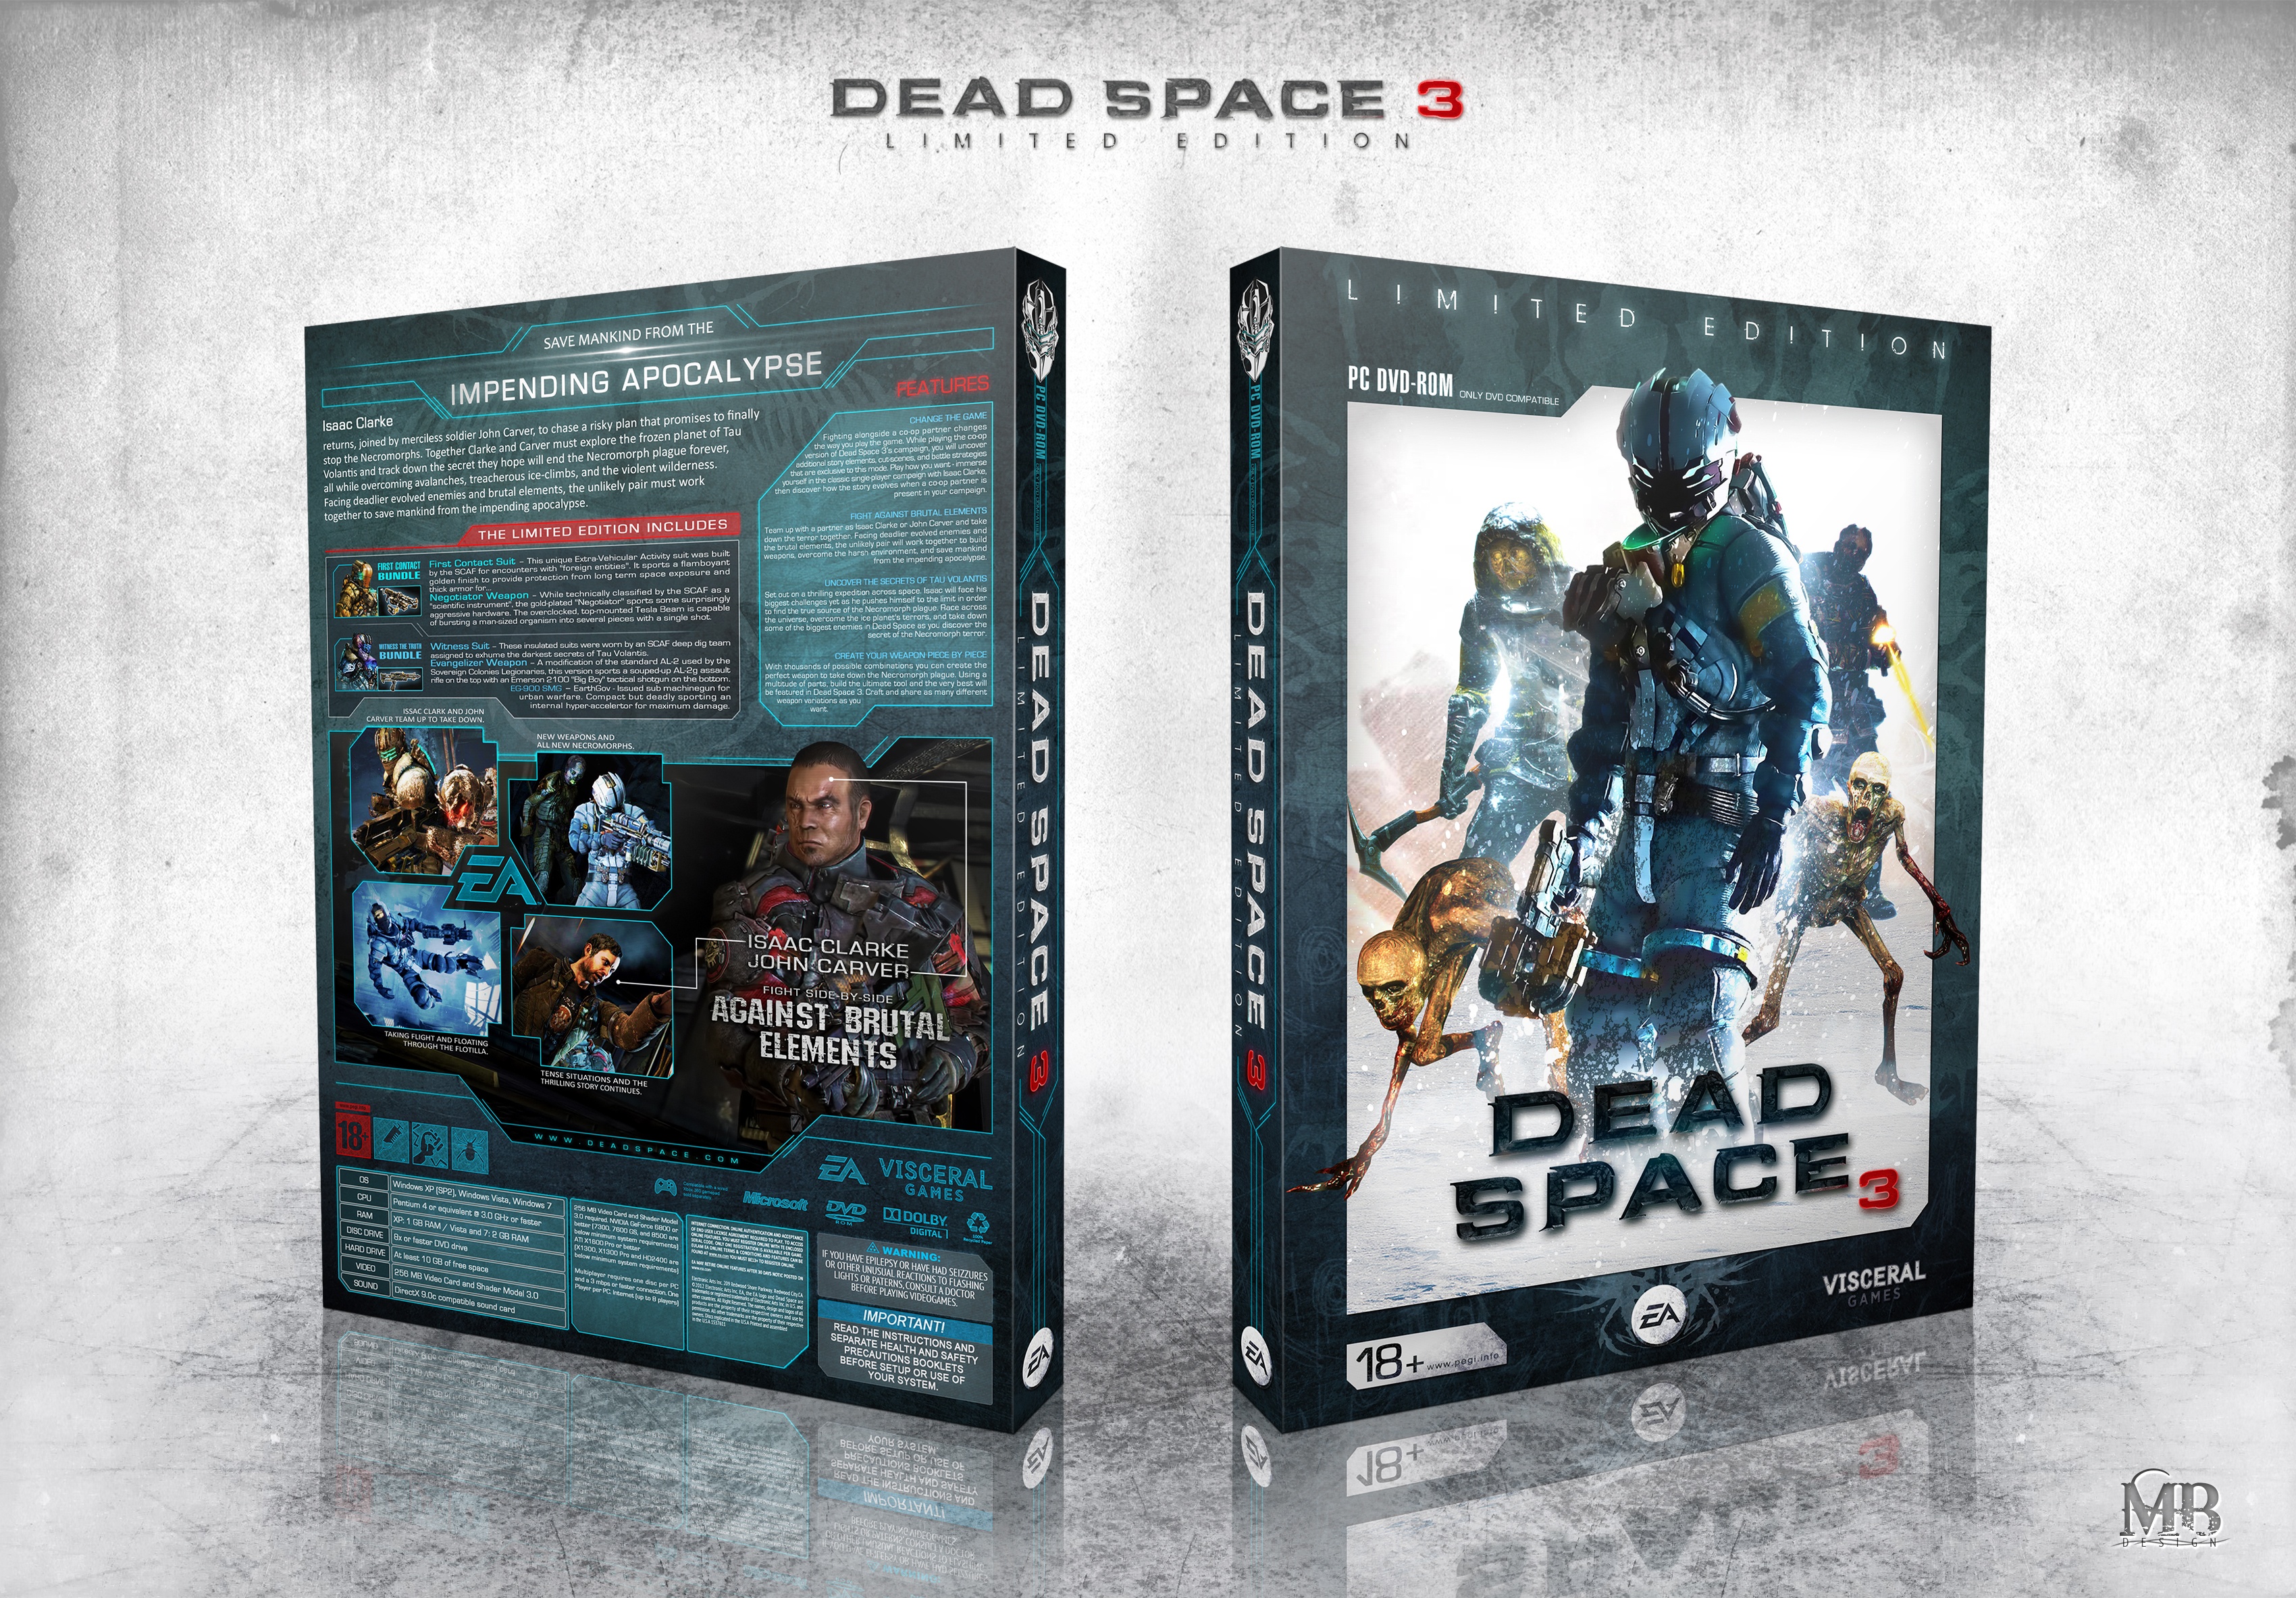 dead space 3 limited edition contiewnt quoi?